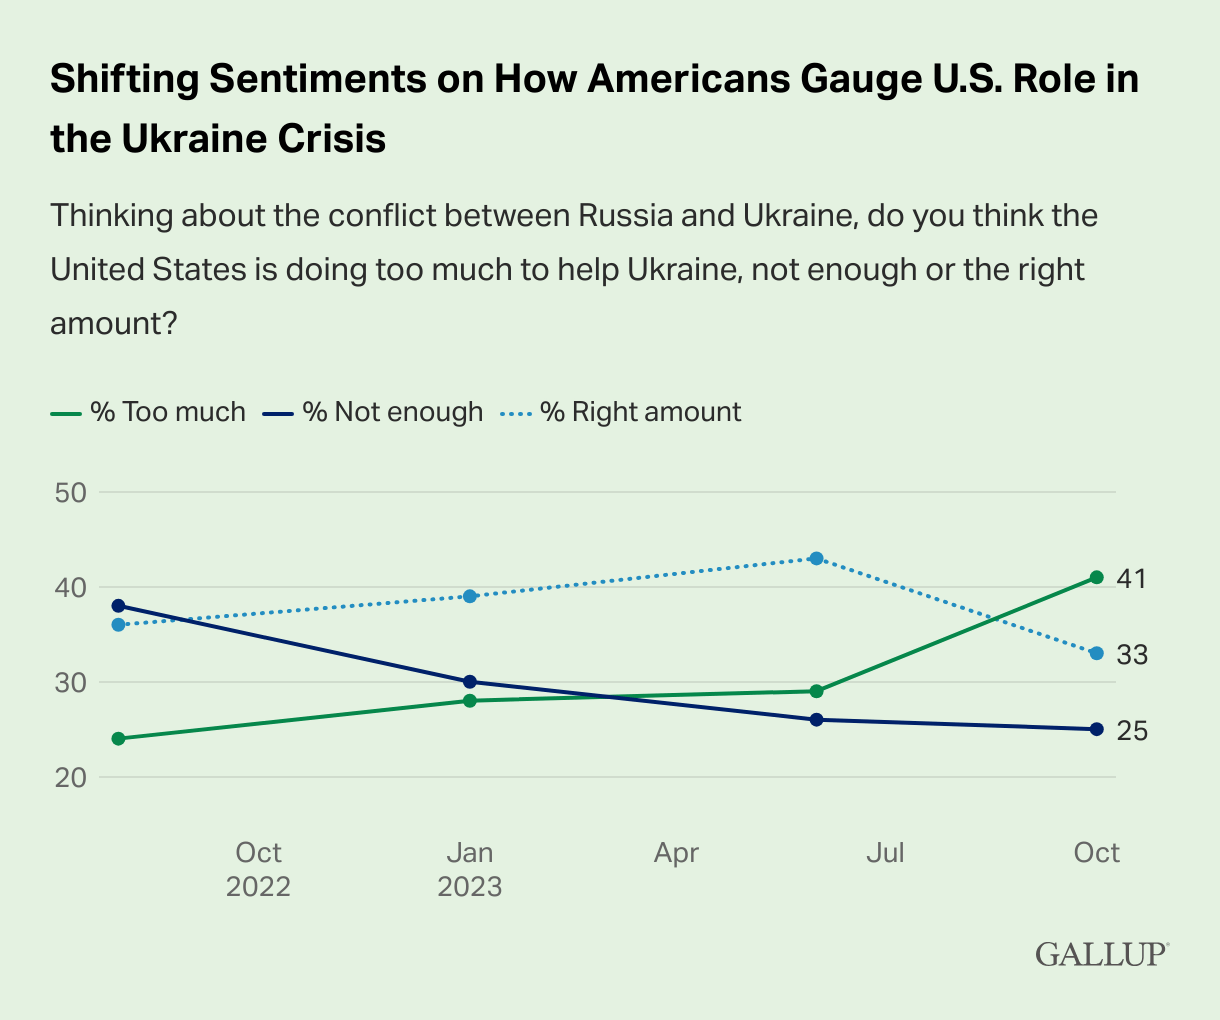 shifting-sentiments-on-how-americans-gauge-u.s.-role-in-the-ukraine-crisis.png 우크라이나 전쟁 회의론과 피로감이 확산된 미국